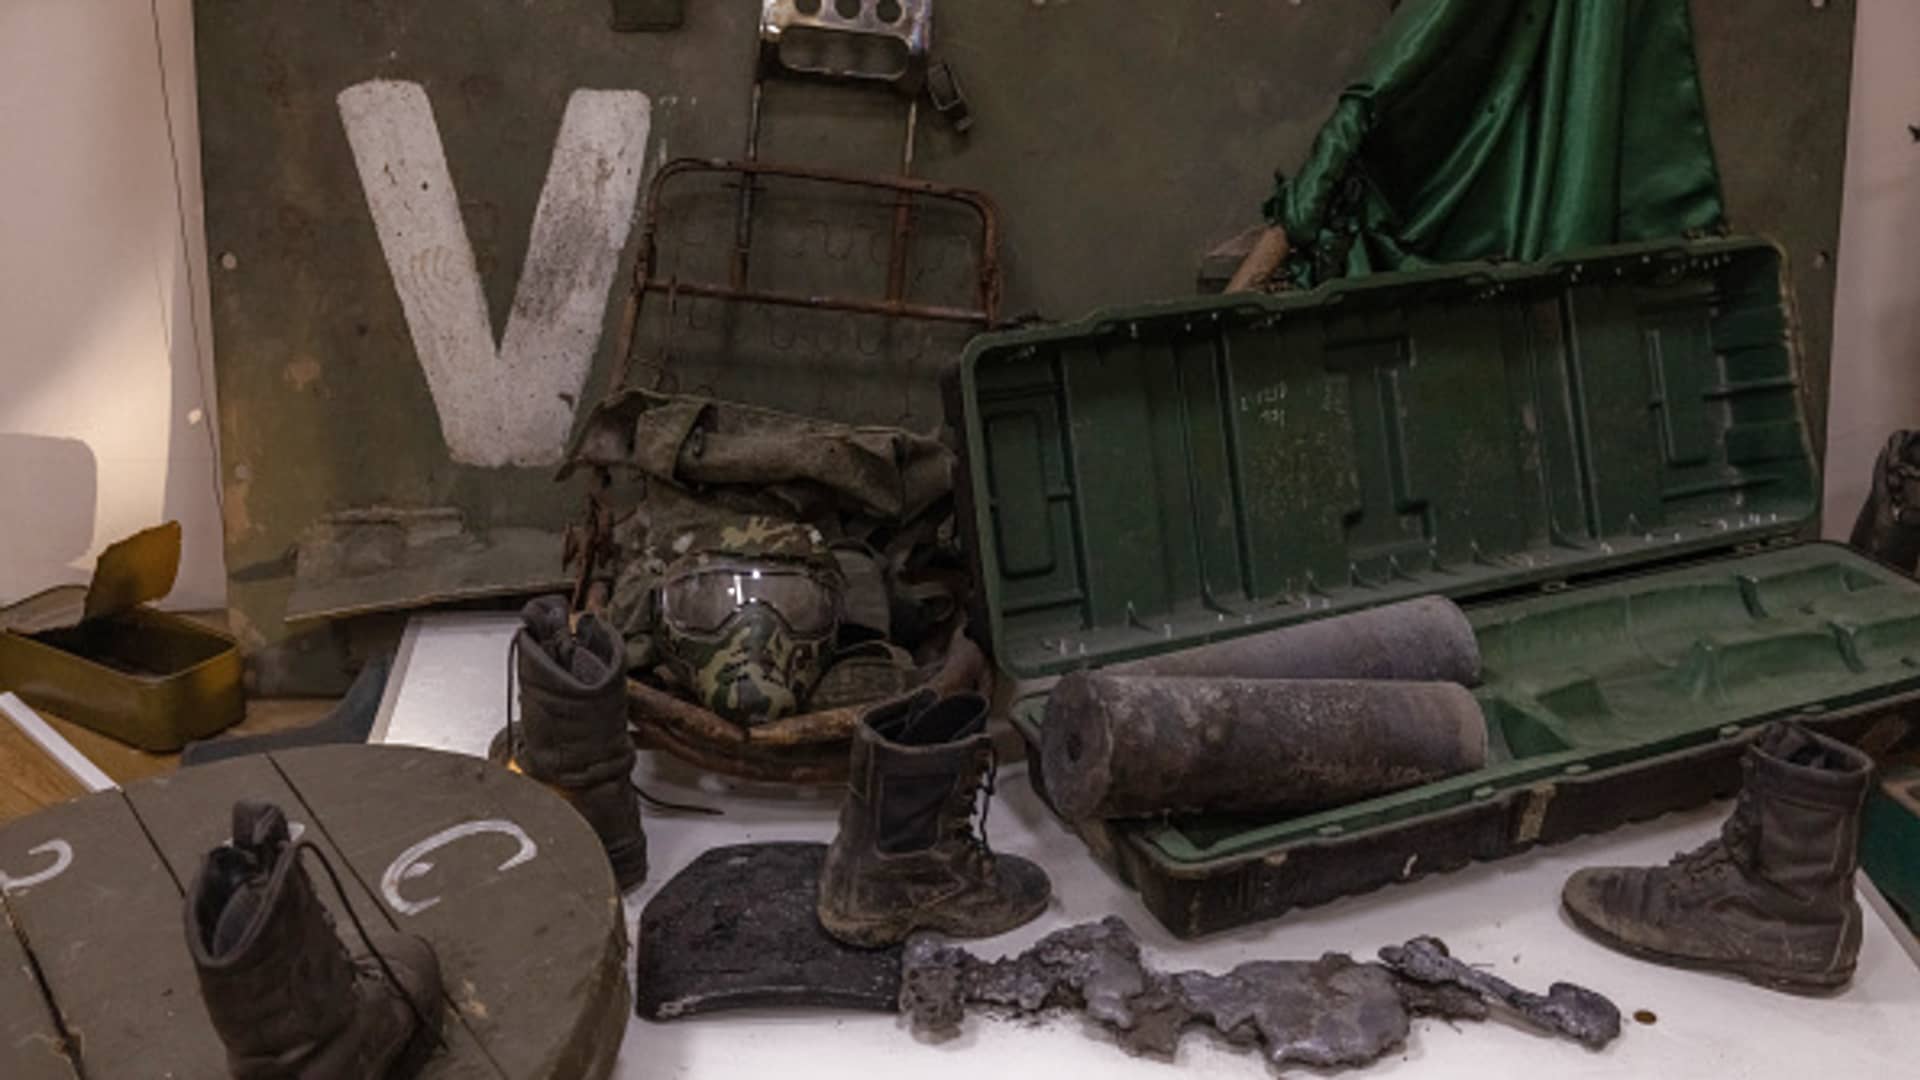 Exhibited items of the Russian army on April 26, 2023 at the National Museum of the History of Ukraine in Kyiv, Ukraine.